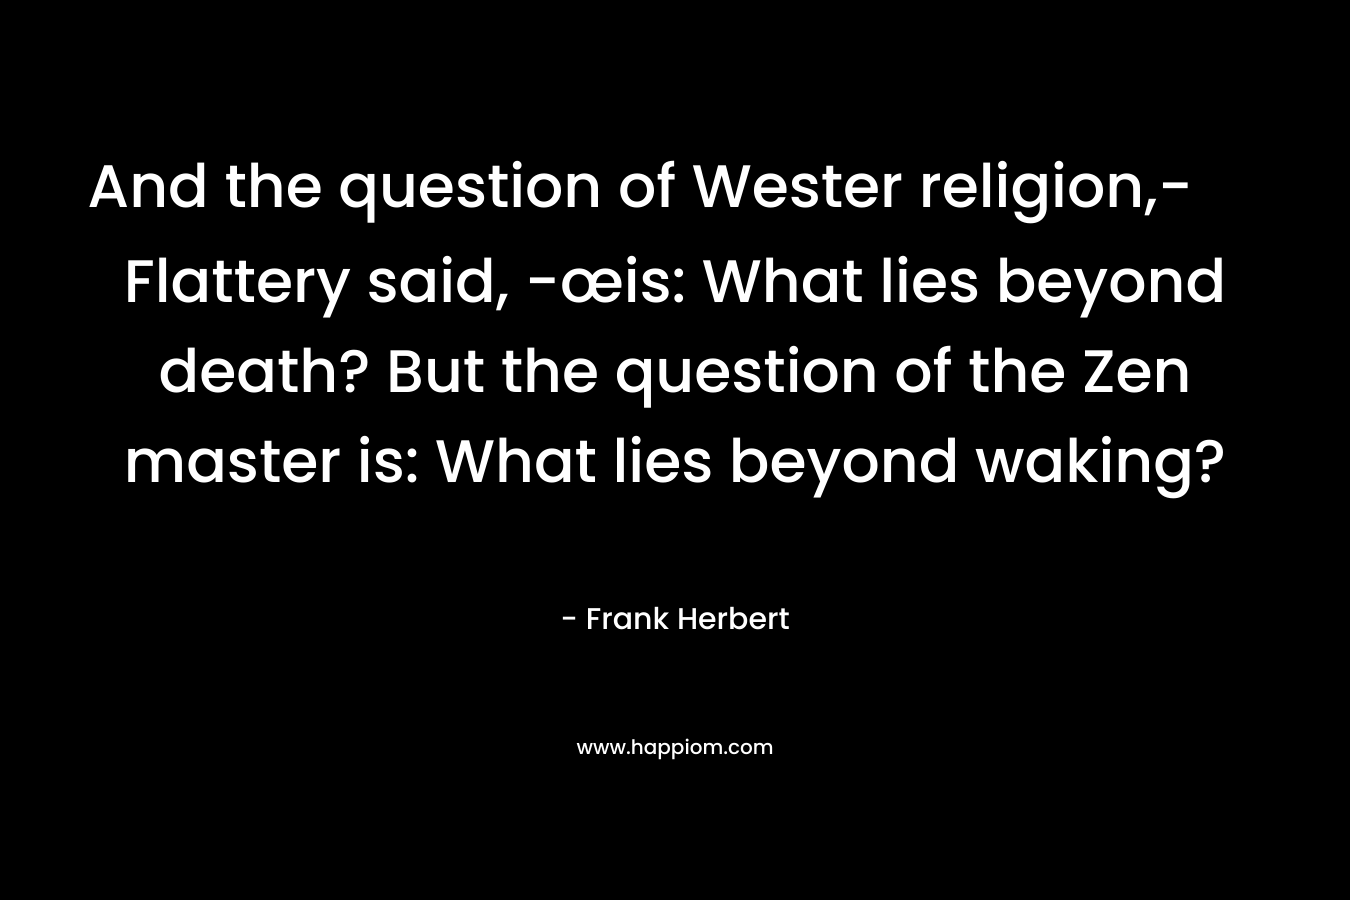 And the question of Wester religion,- Flattery said, -œis: What lies beyond death? But the question of the Zen master is: What lies beyond waking? – Frank Herbert